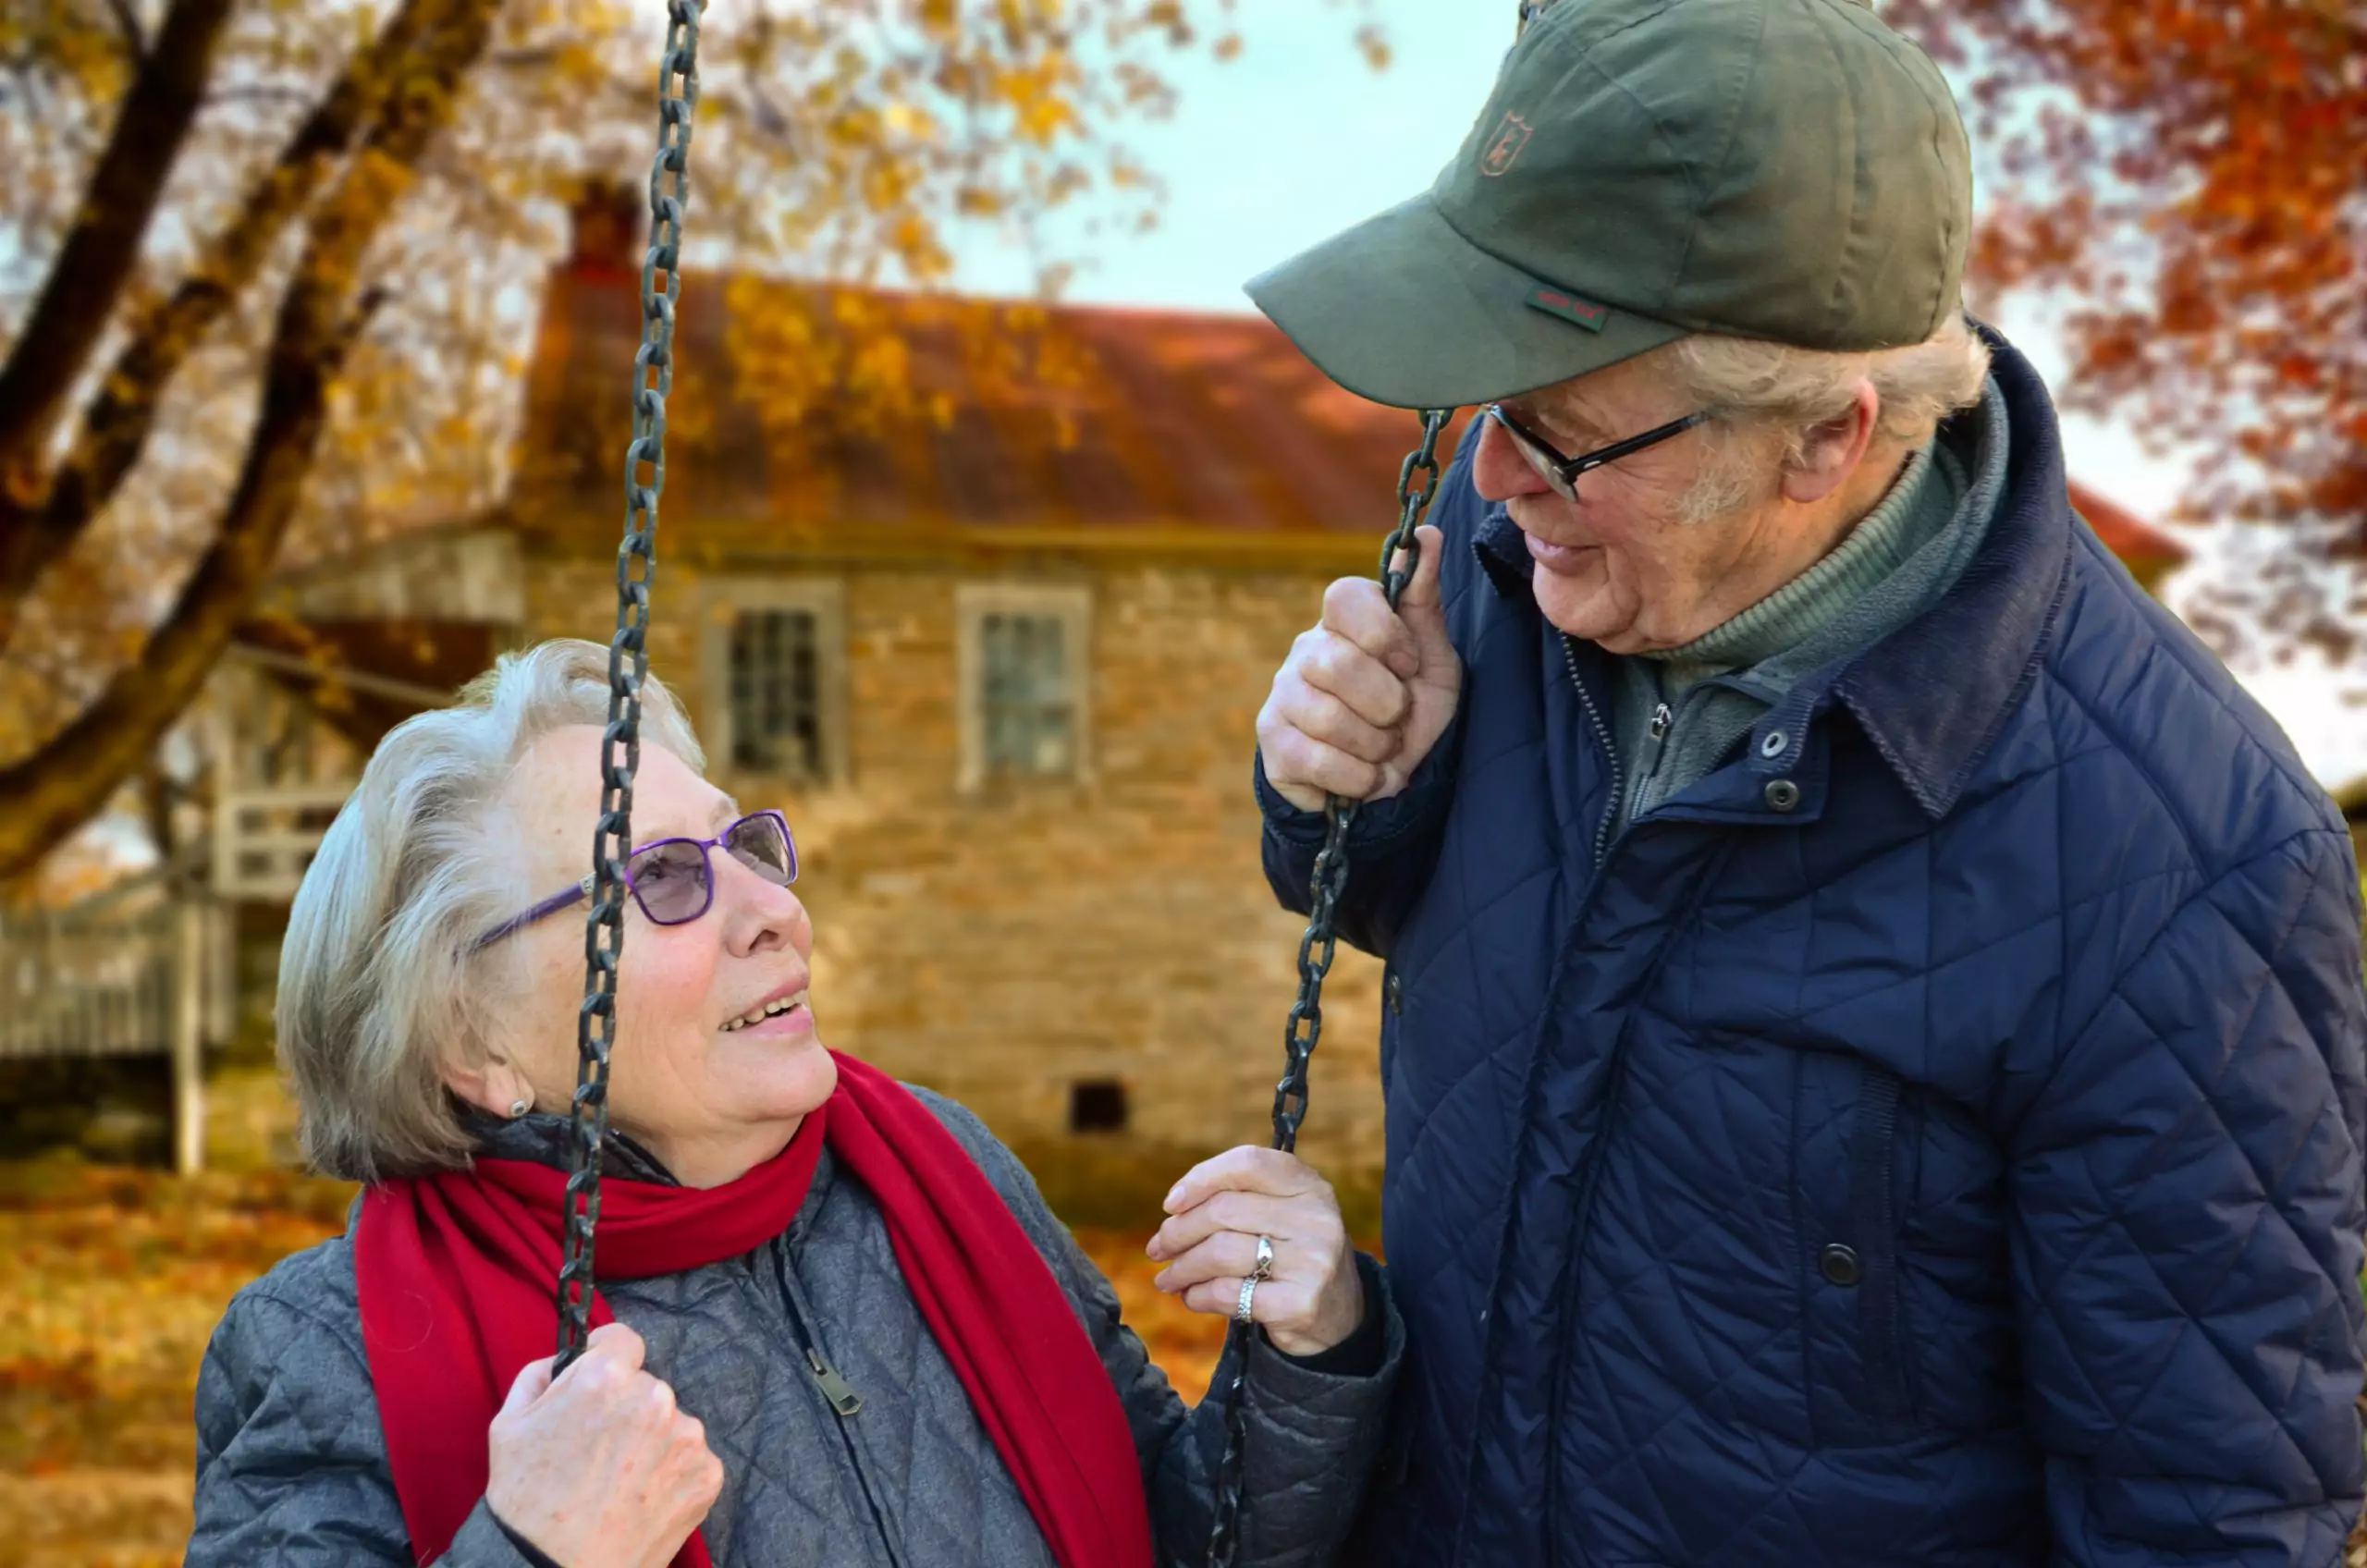 An elderly couple smile at one another outside while the woman sits on a swing